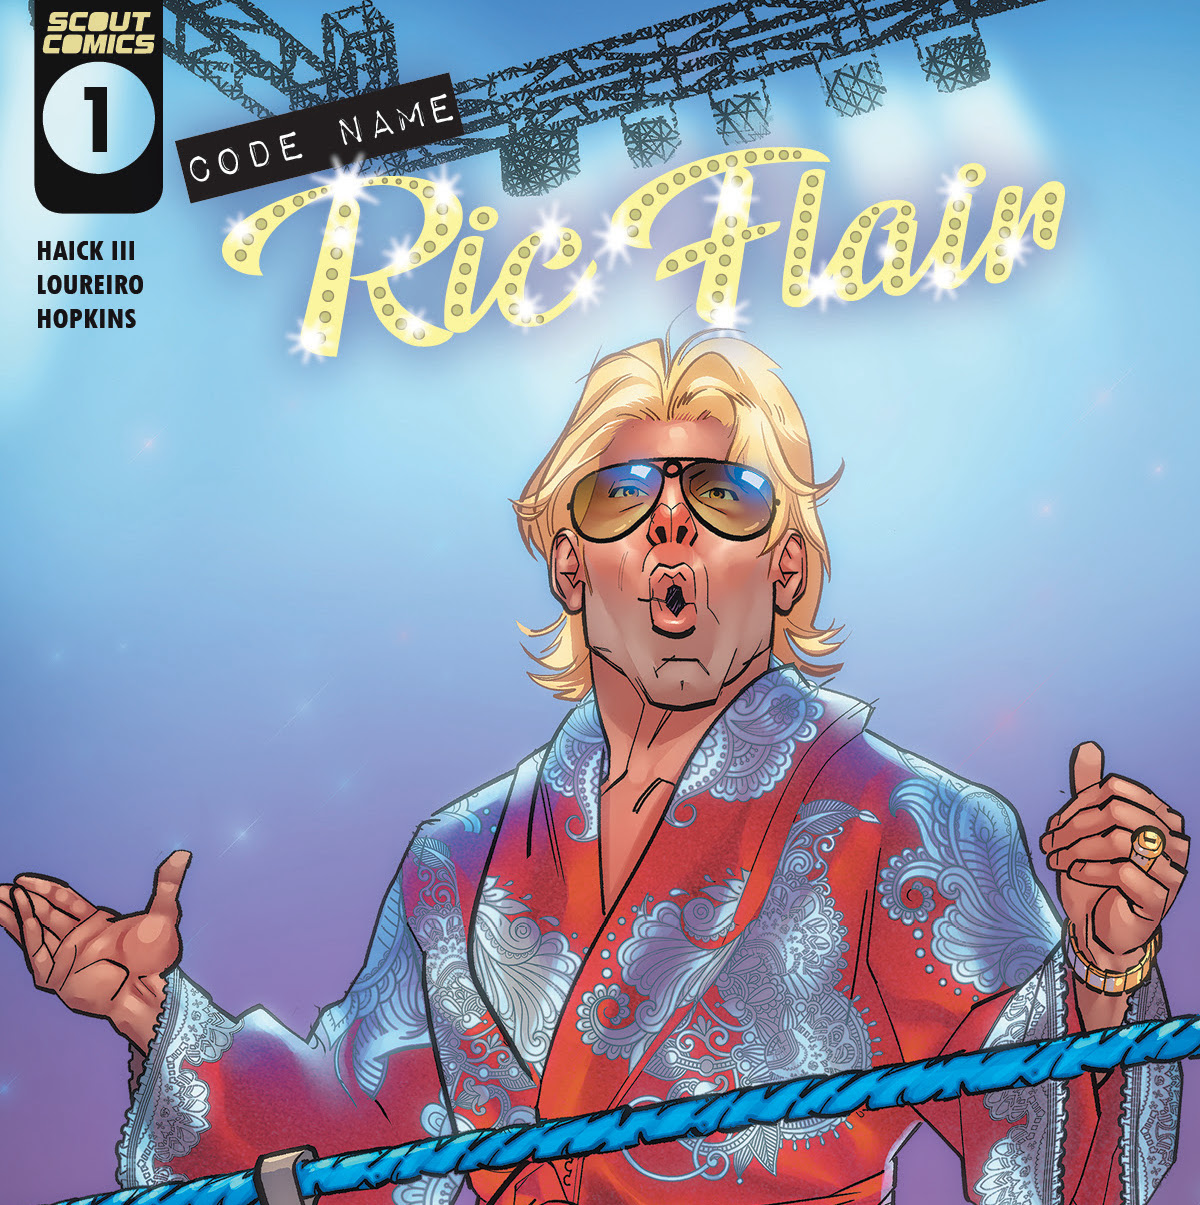 Scout Comics to publish 'Codename Ric Flair' for April 2023